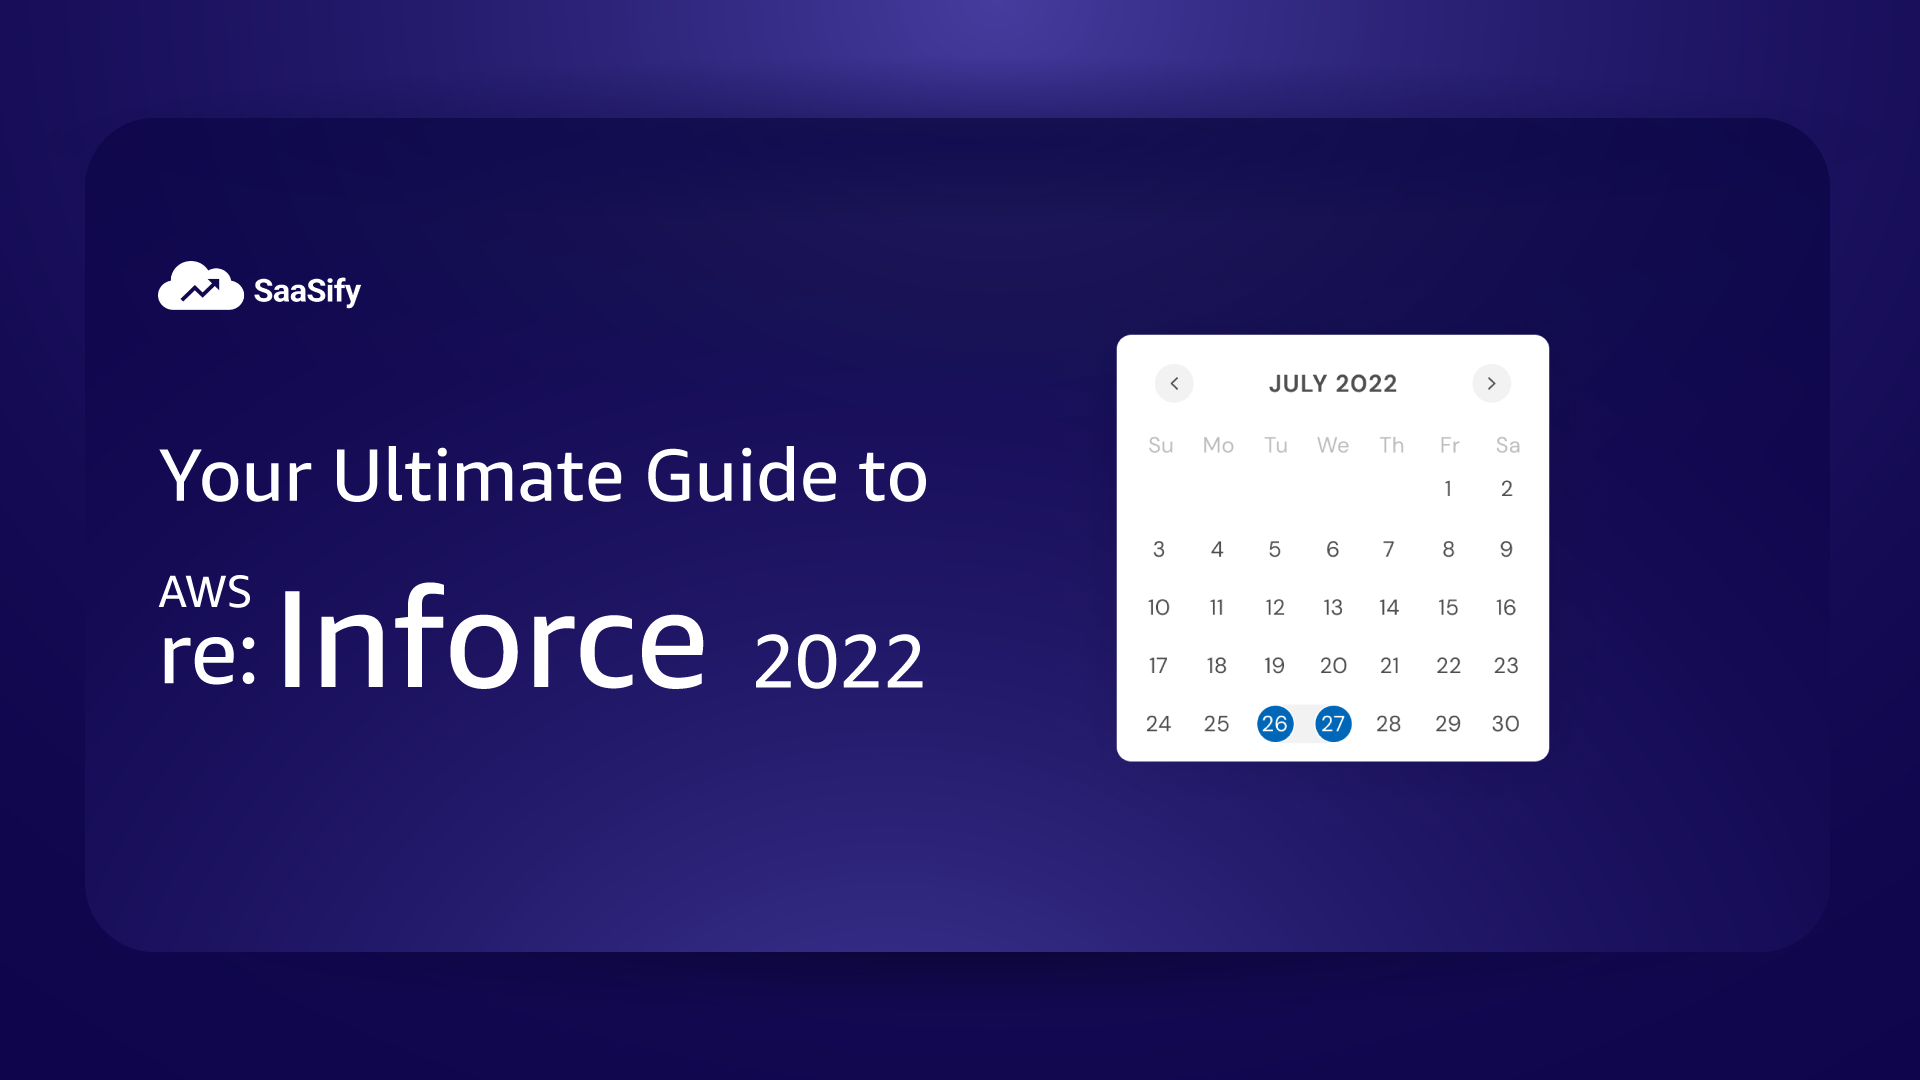 Get ready for AWS re:Inforce 2022 with this ultimate guide